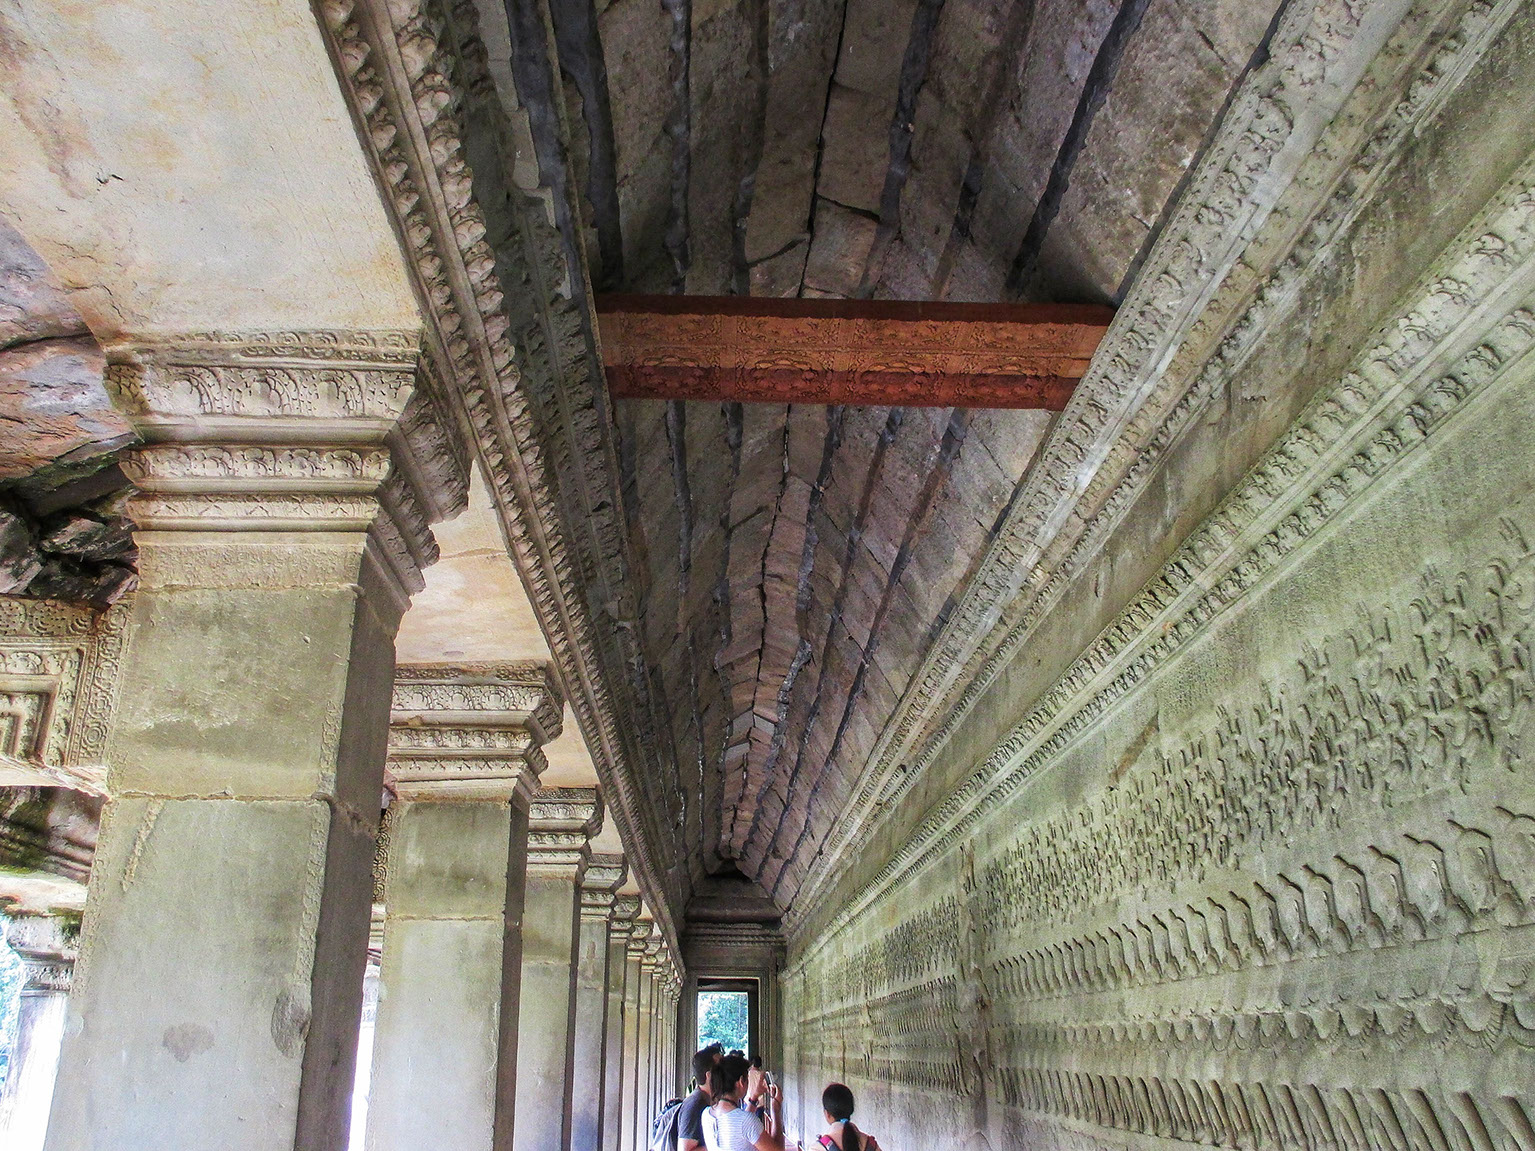 One of the many corridors in the gallery of Angkor Wat with decorated walls